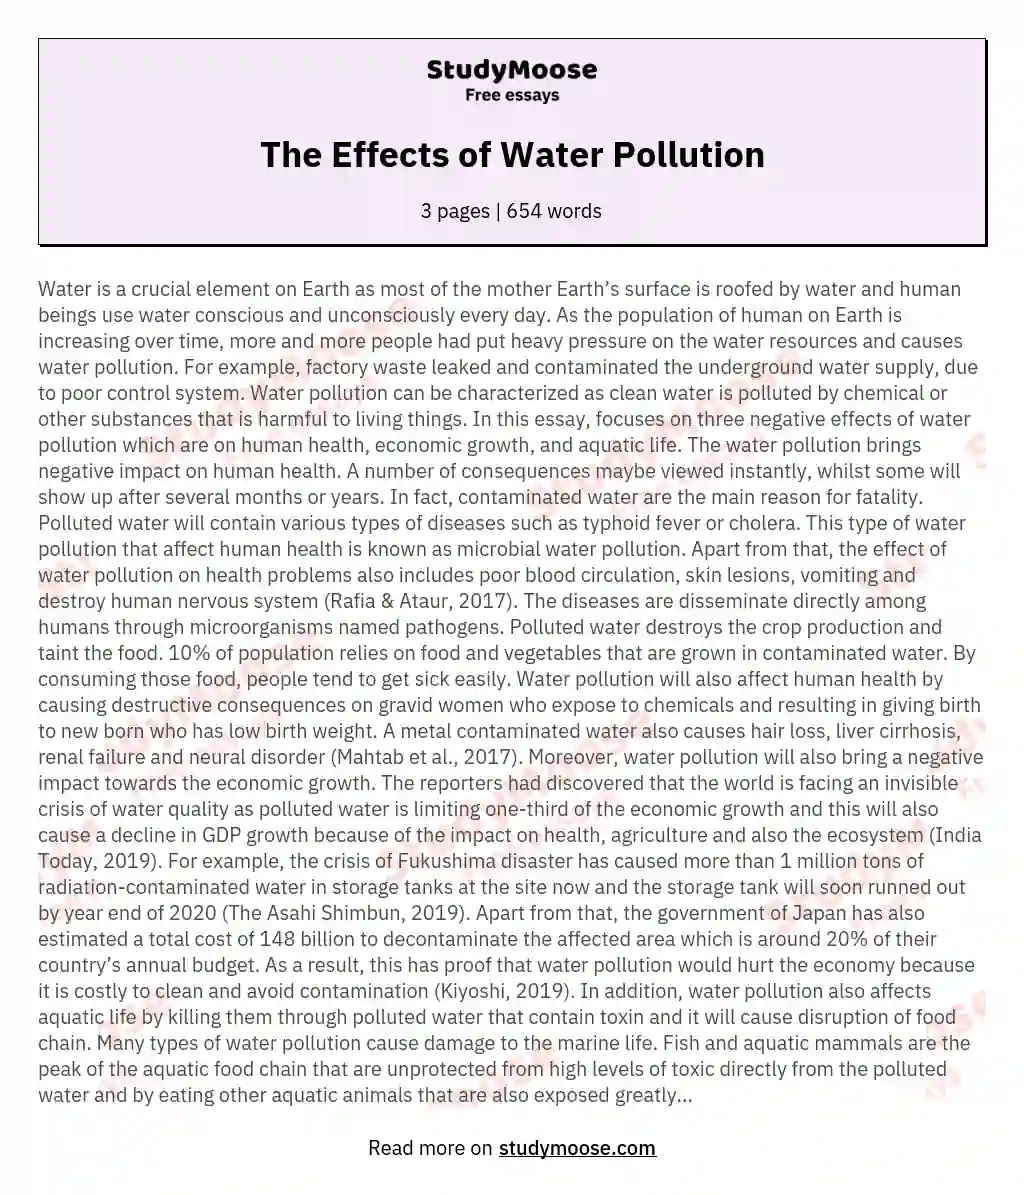 The Effects of Water Pollution essay